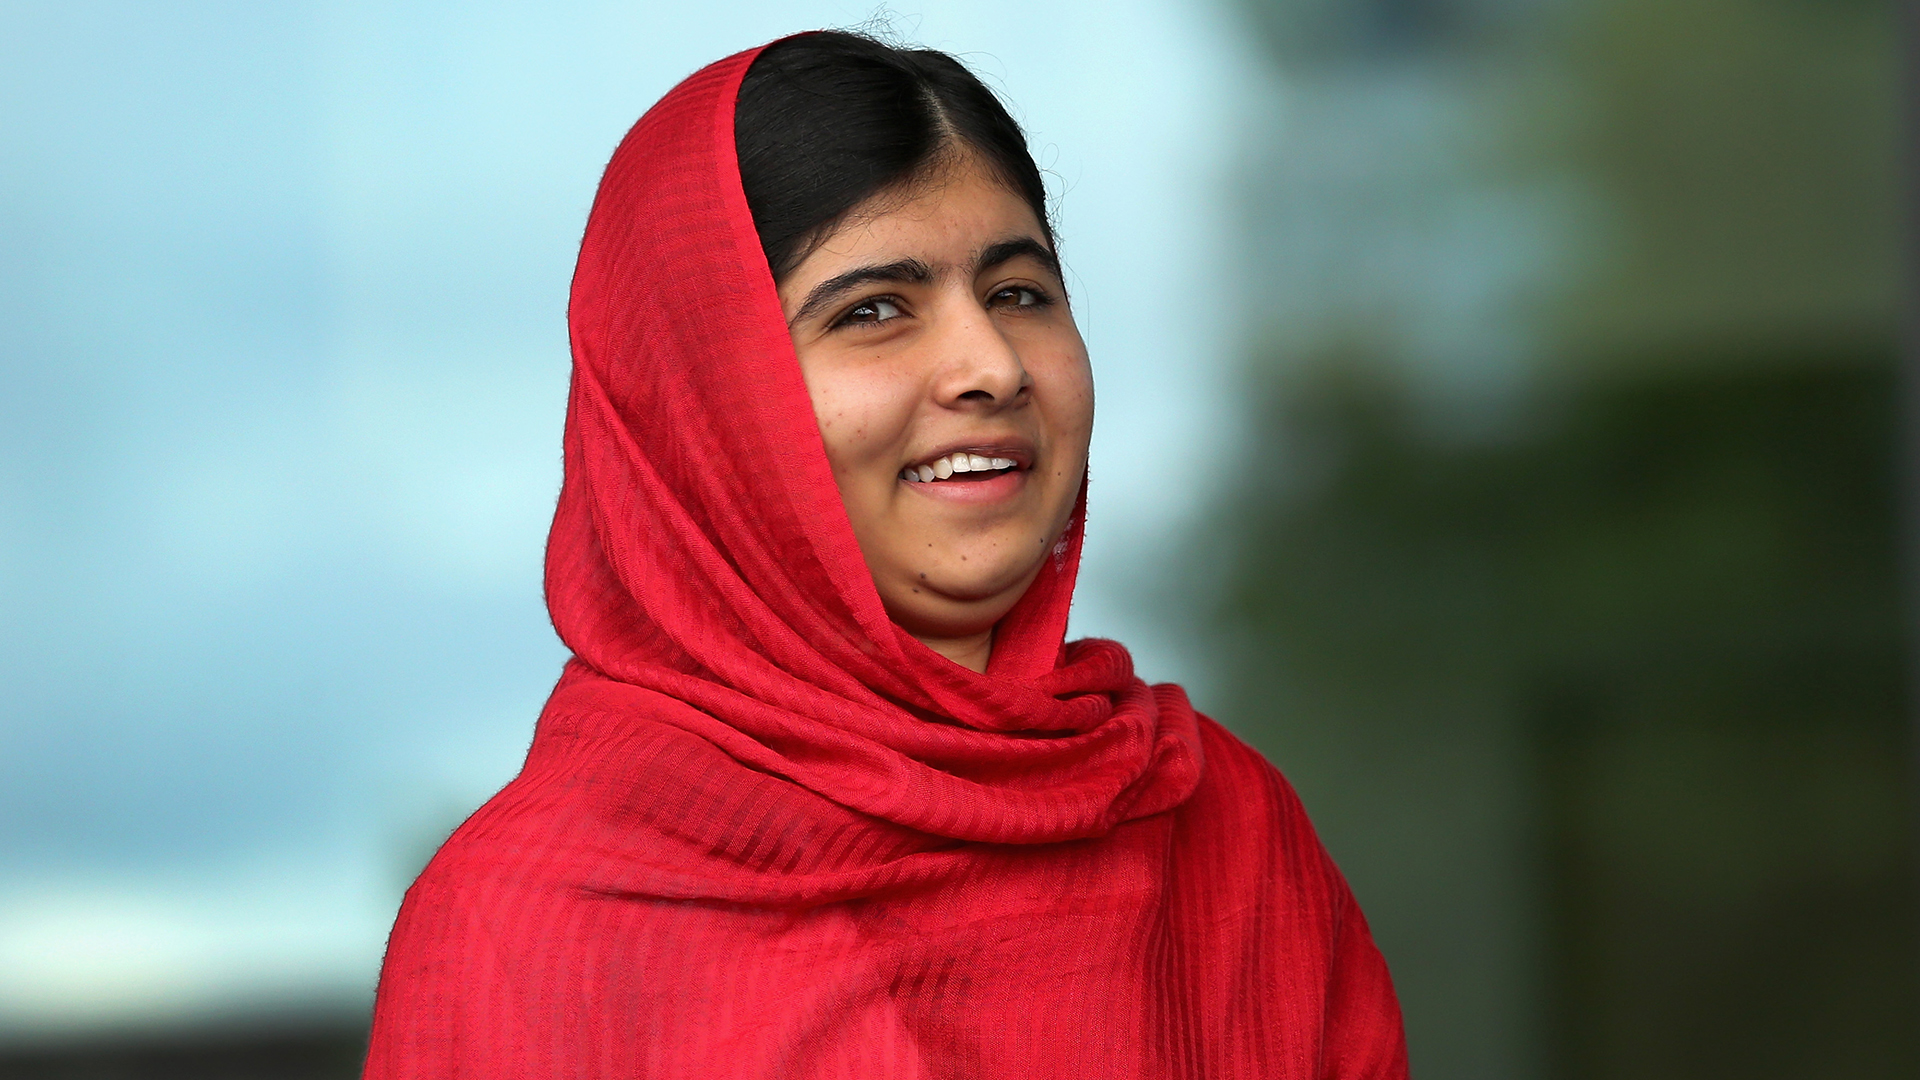 17-year-old Malala shares Nobel Peace Prize - TODAY.com1920 x 1080